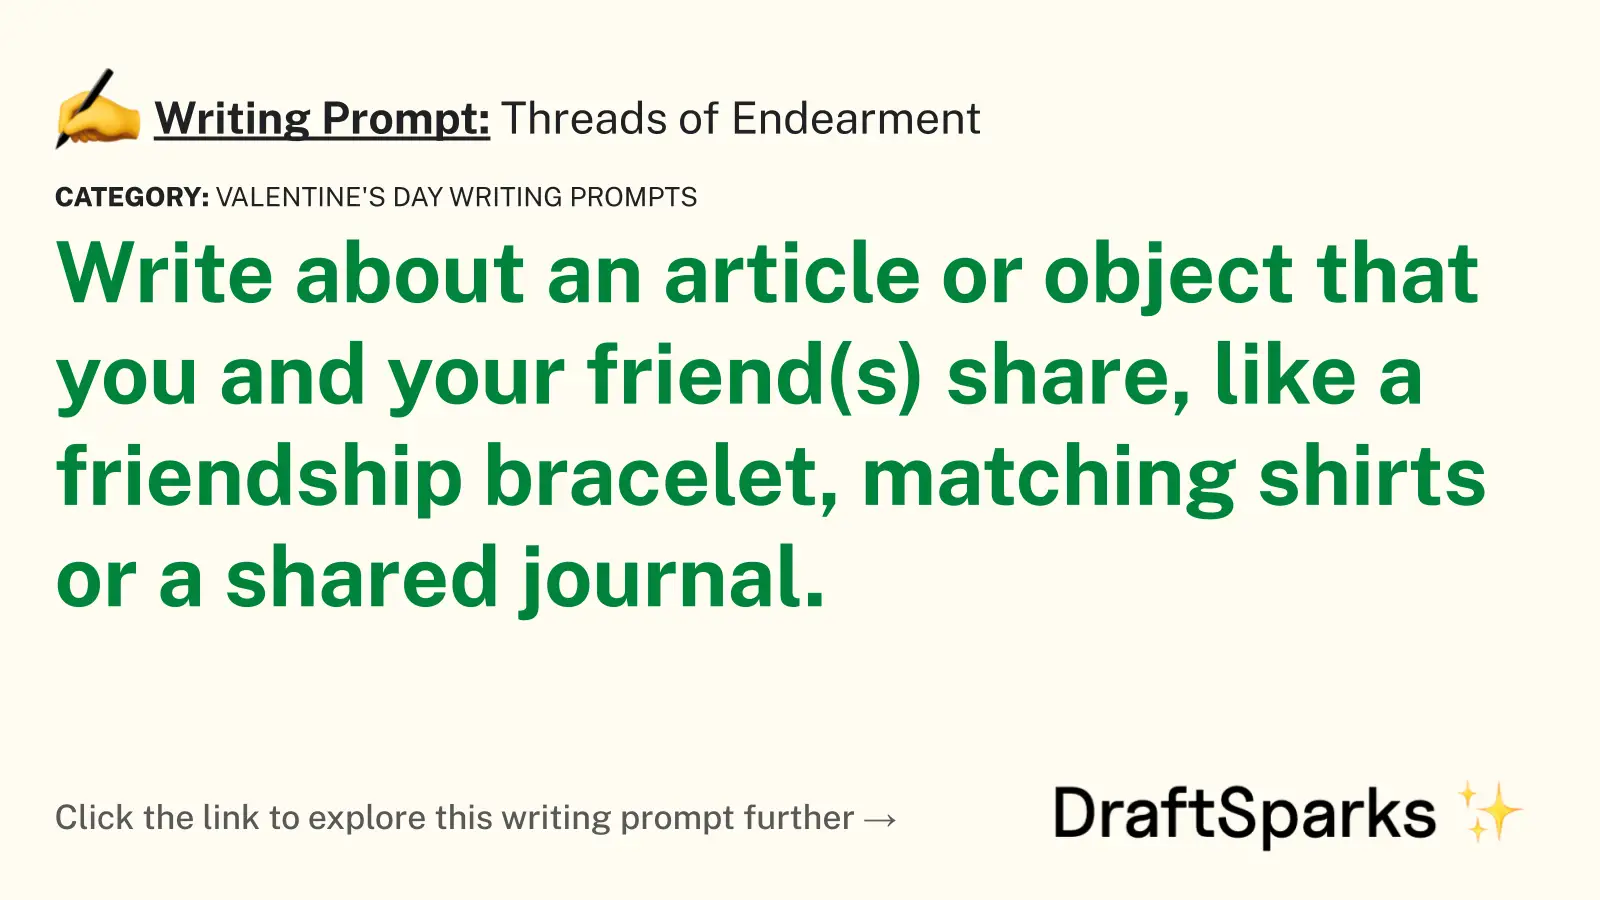 Threads of Endearment